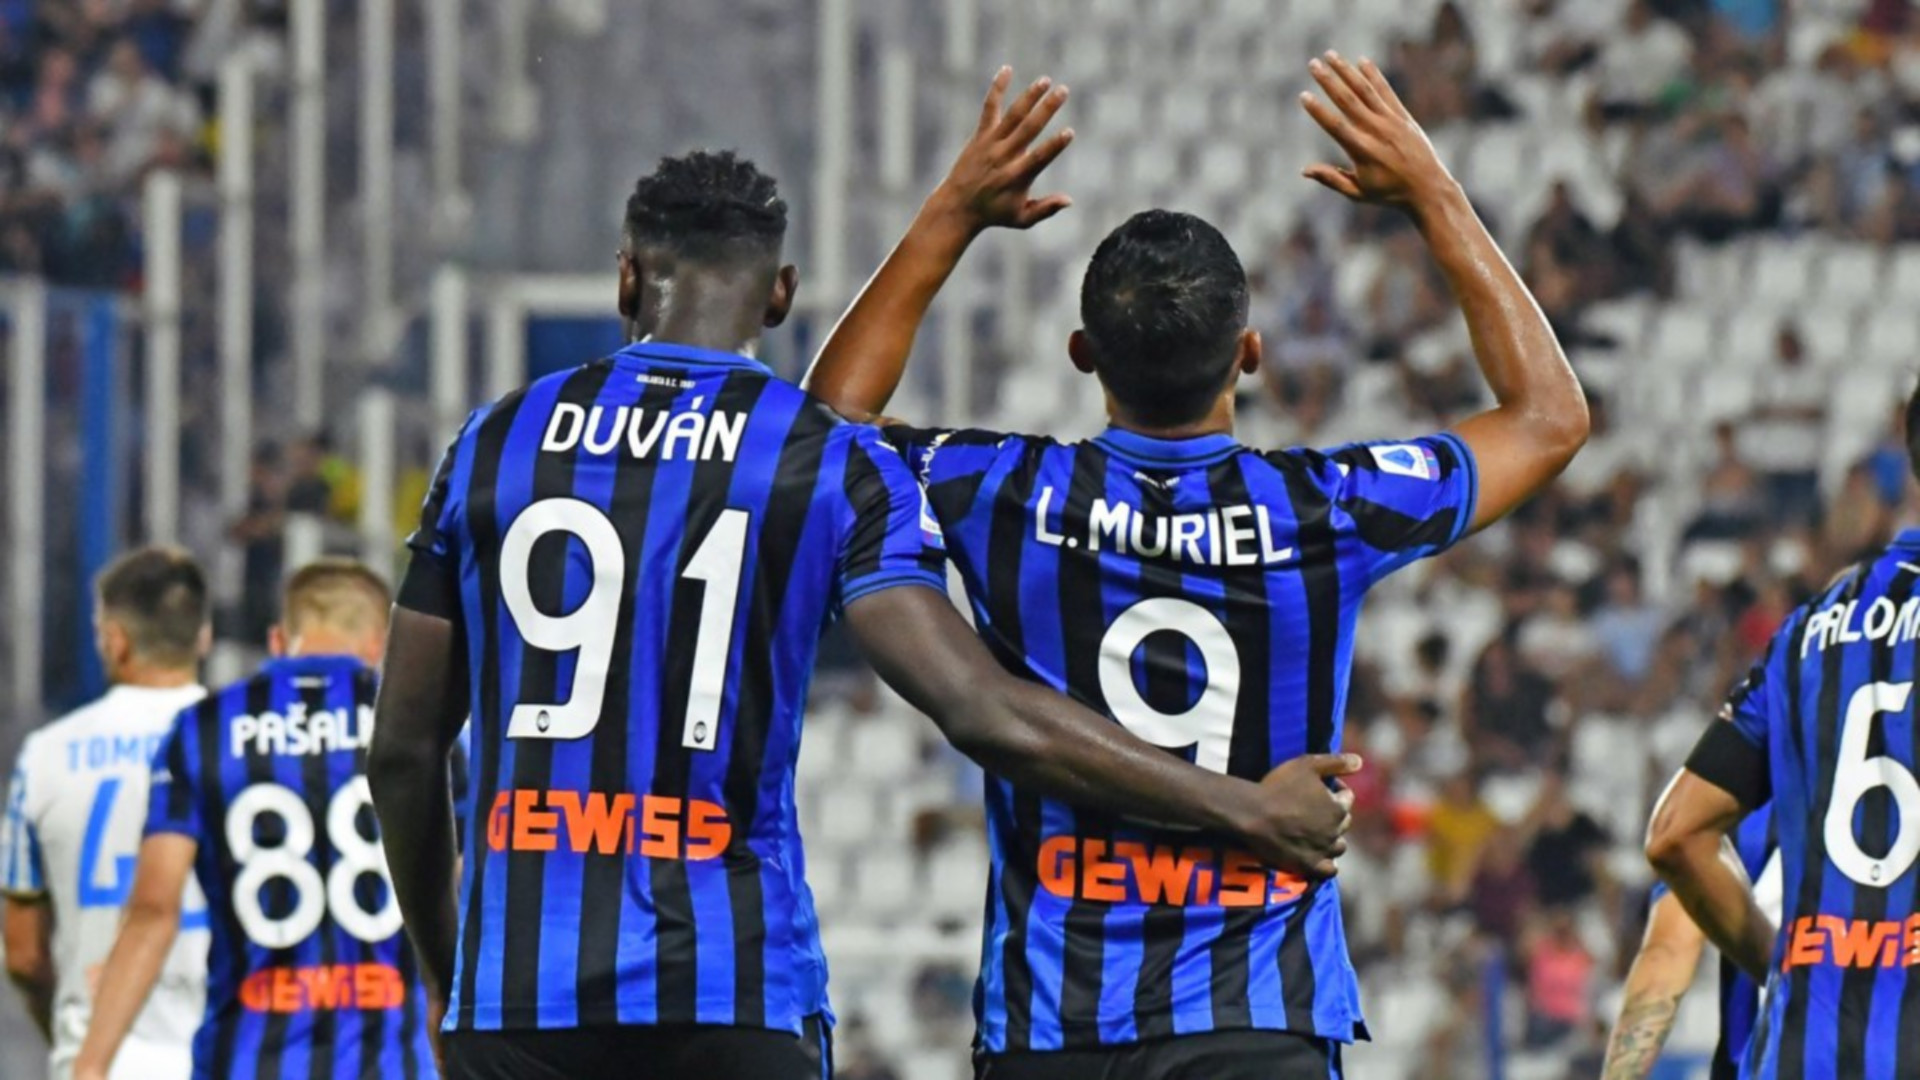 Atalanta should keep ahold of Duvan Zapata following the injury of El Bilal Tourè, while Luis Muriel could depart anyway.